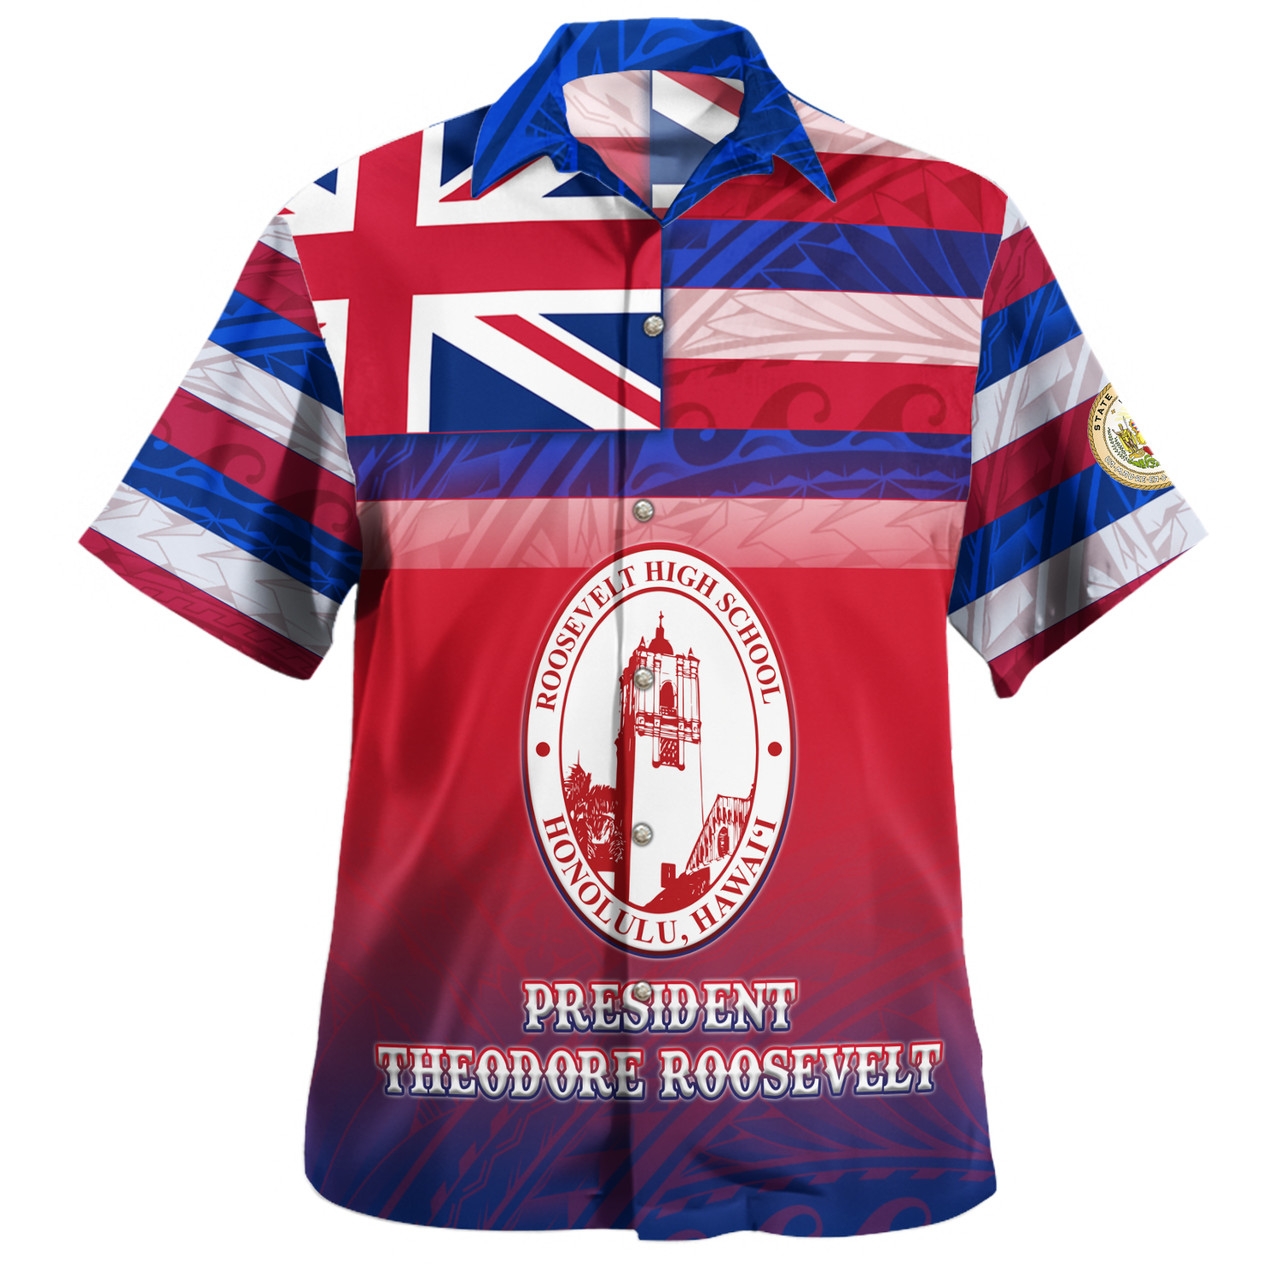 Hawaii President Theodore Roosevelt High School Hawaii Shirt Flag Color With Traditional Patterns